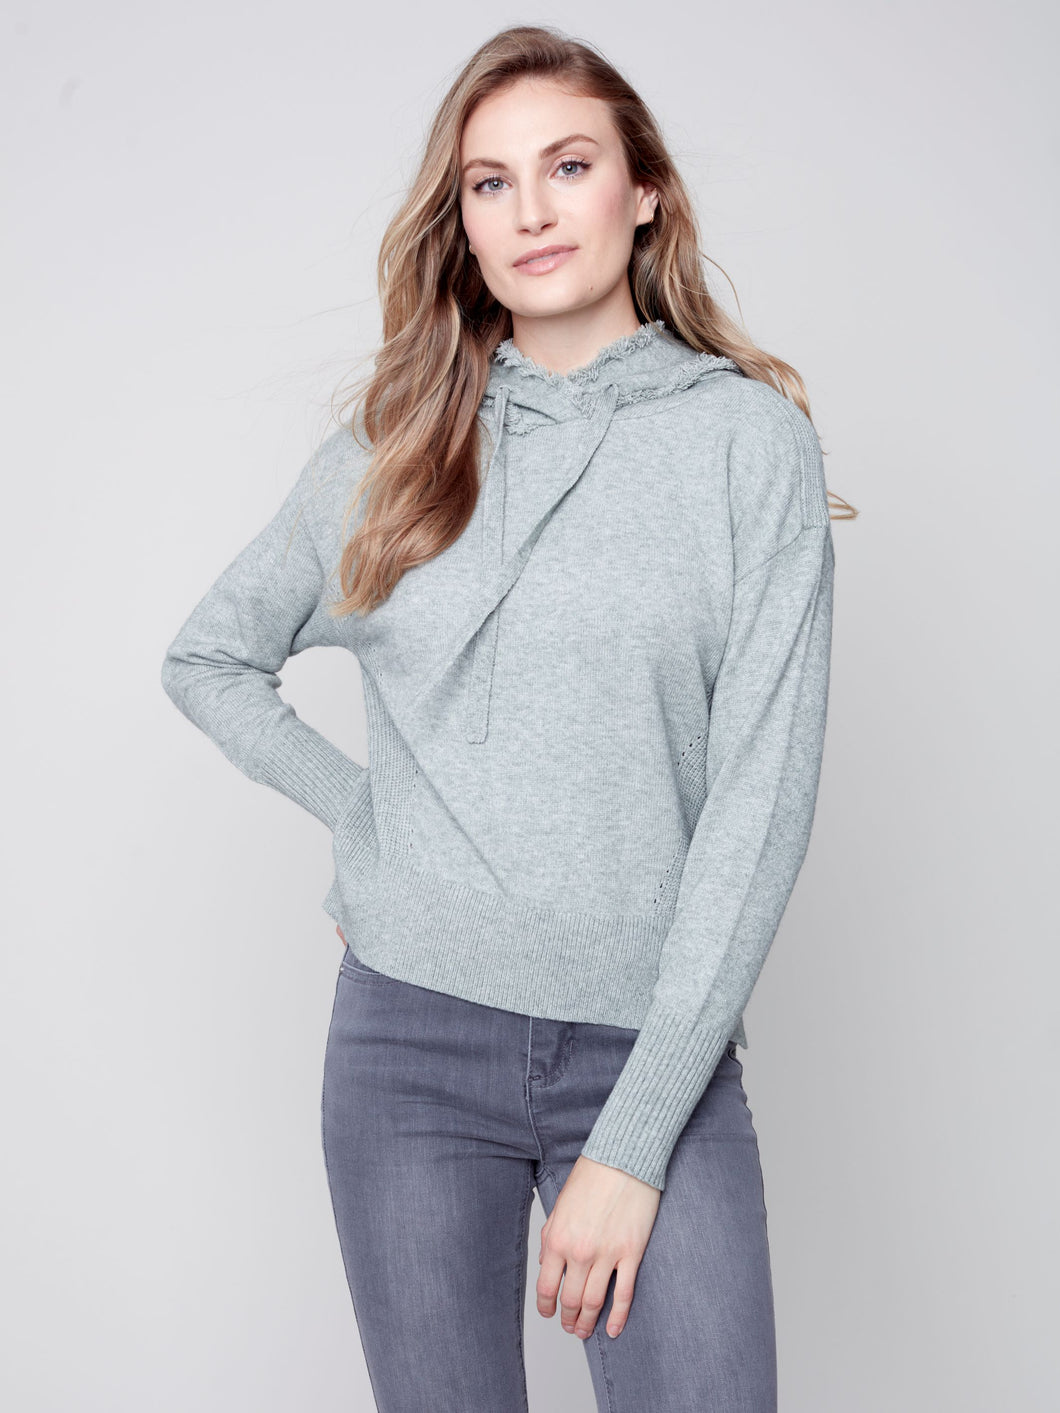 Charlie B Lizzy Hooded Sweater